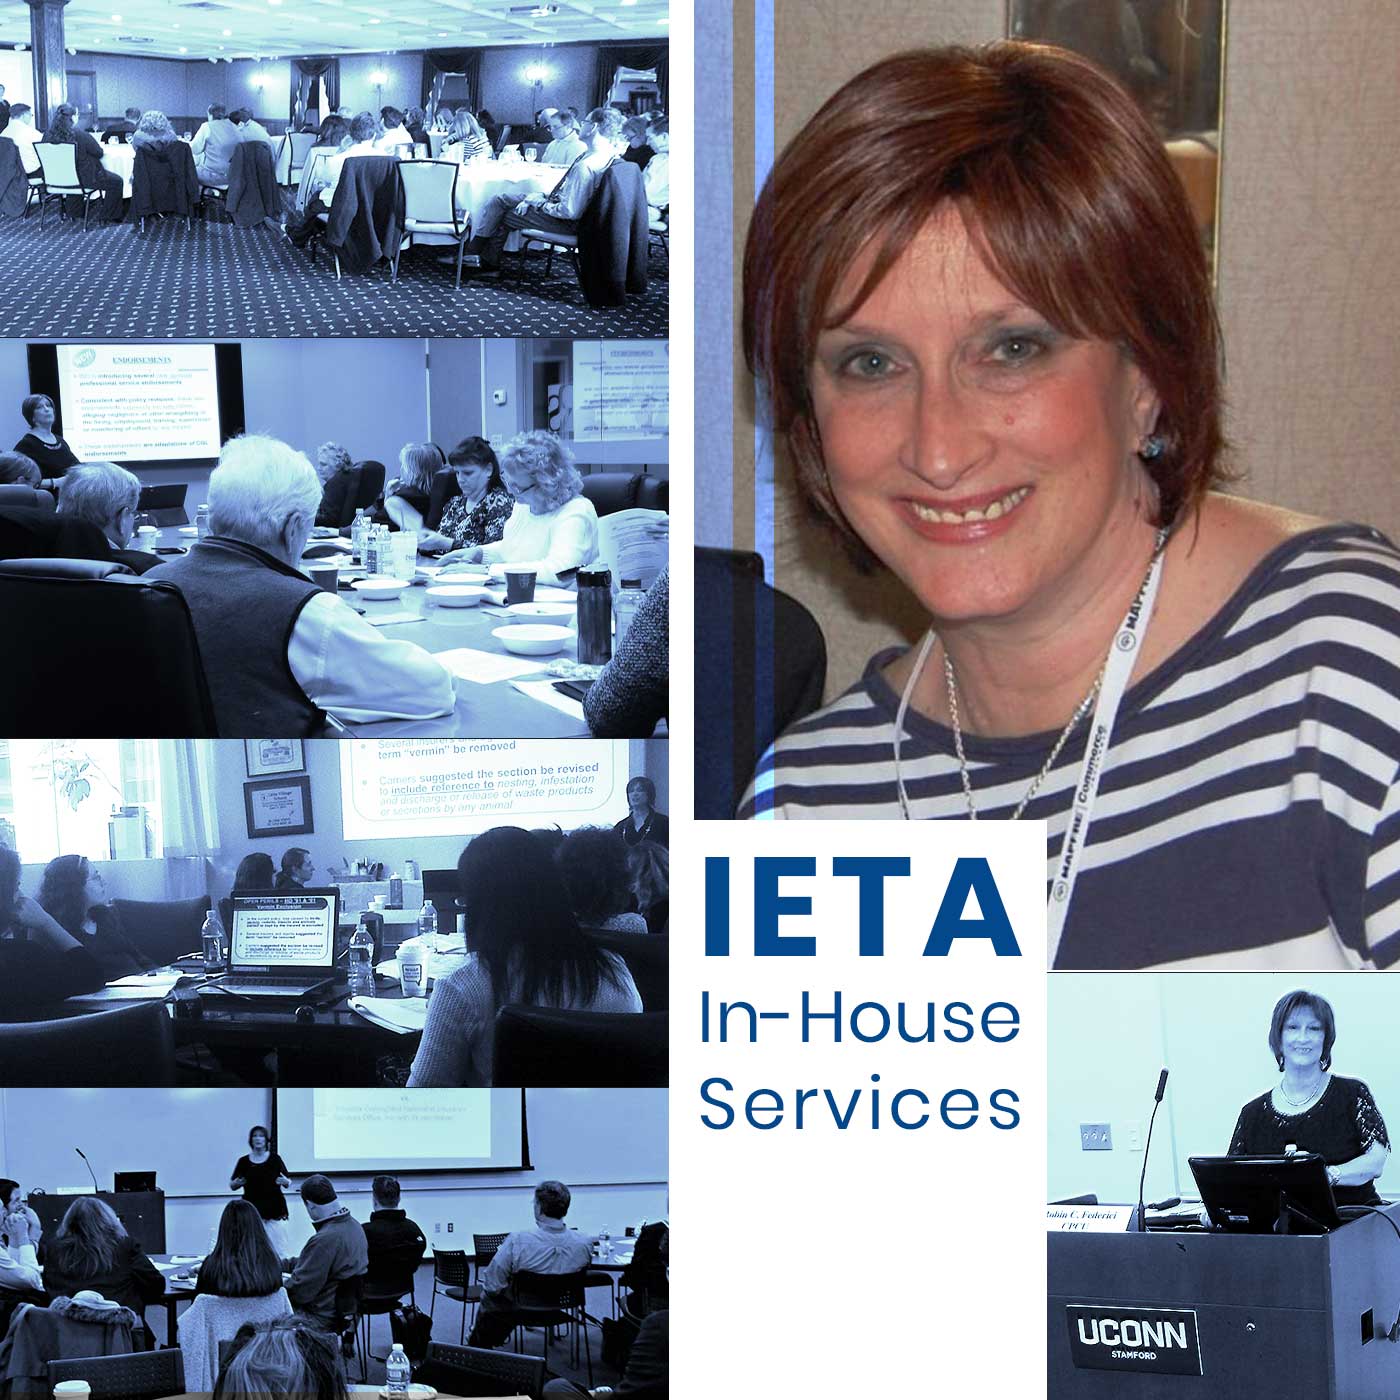 IETA In-House Services